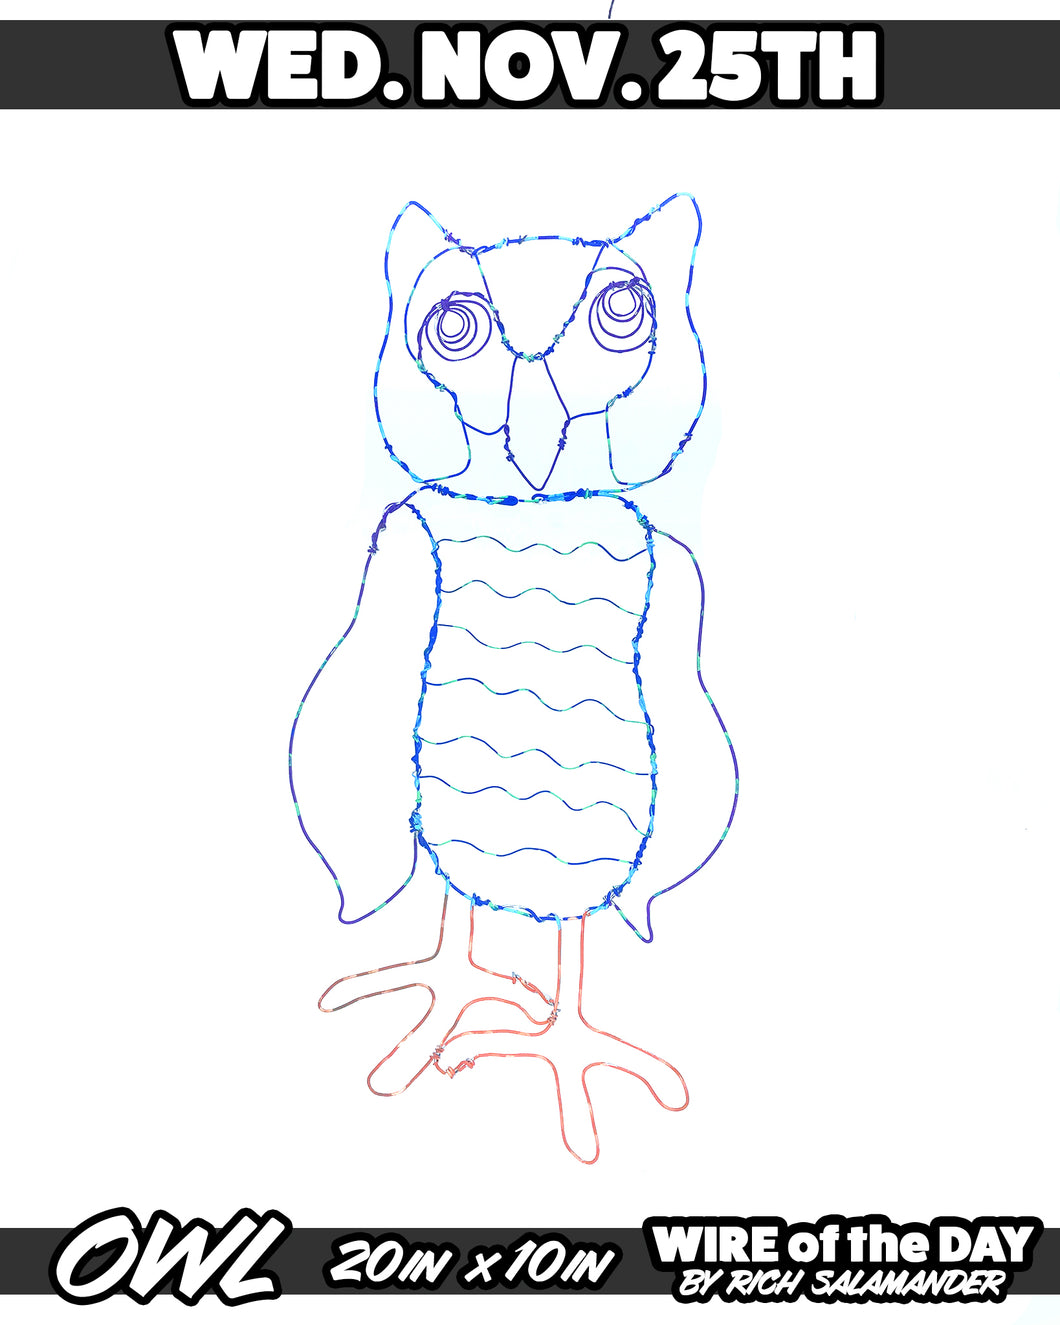 WIRE of the DAY OWL